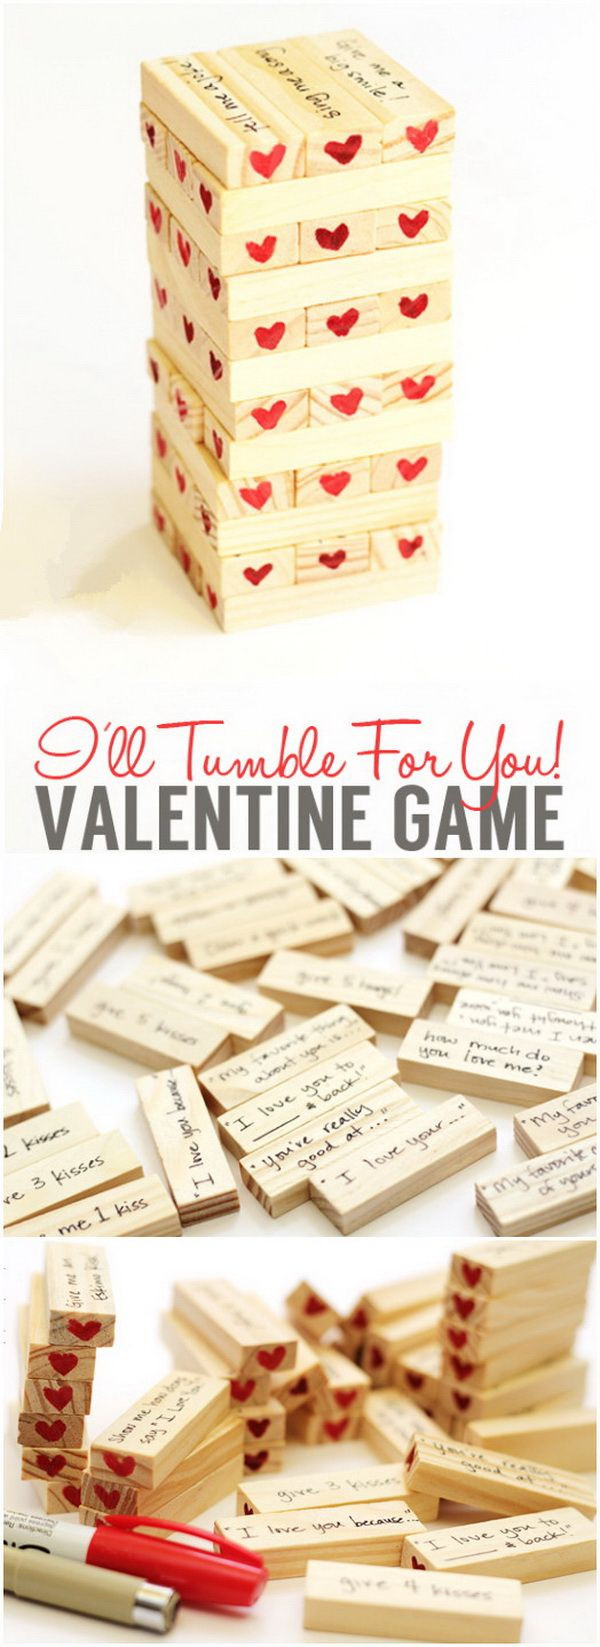 Valentine Day Gift For Husband Ideas
 Valentine’s Day Hearty Tumble Game Another fun t idea